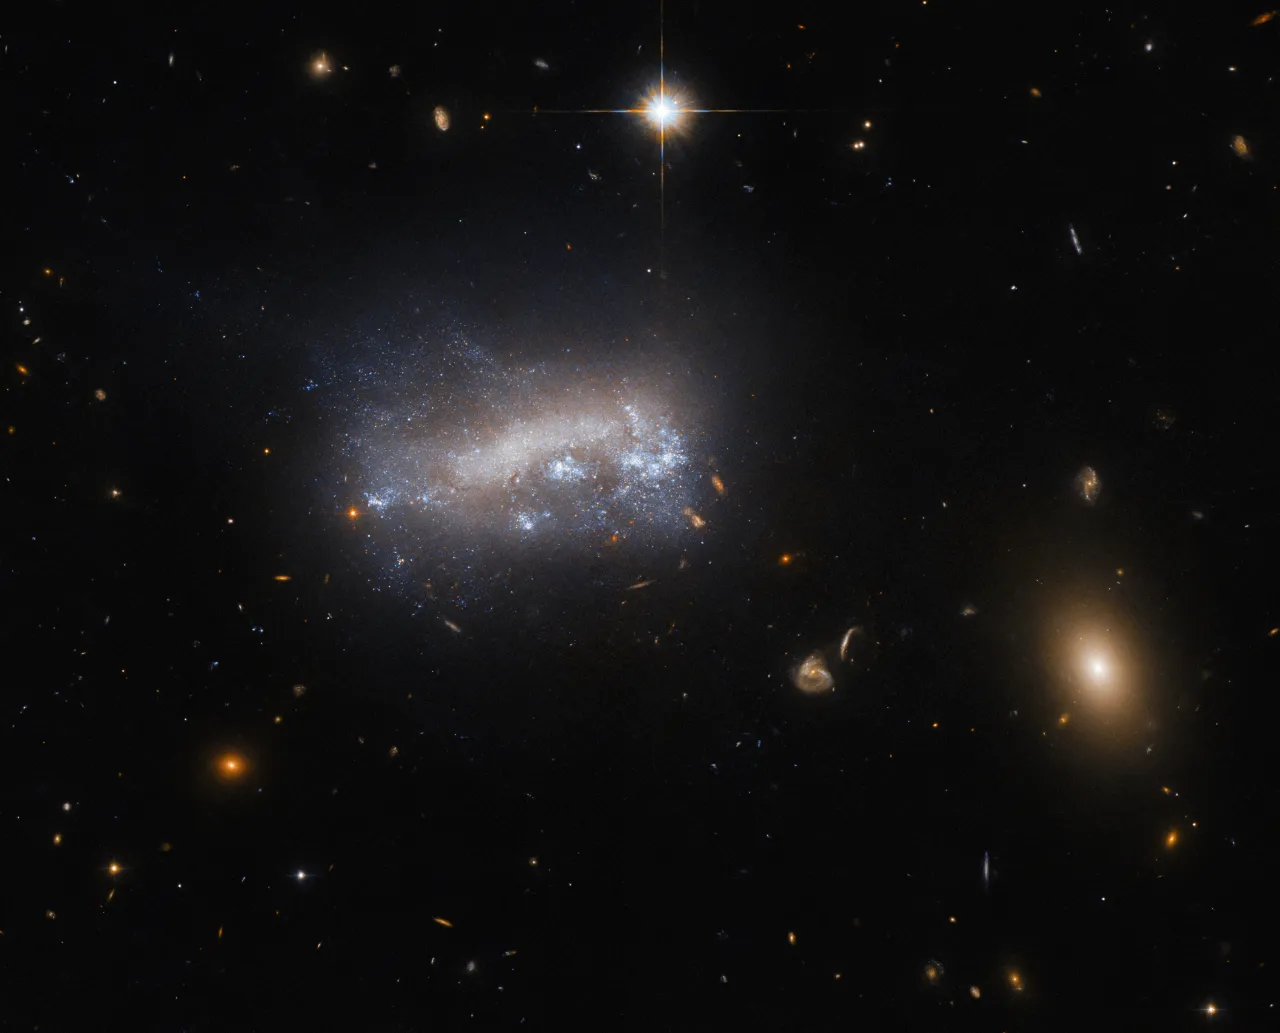 A dwarf galaxy under pressure: Check out this Hubble image